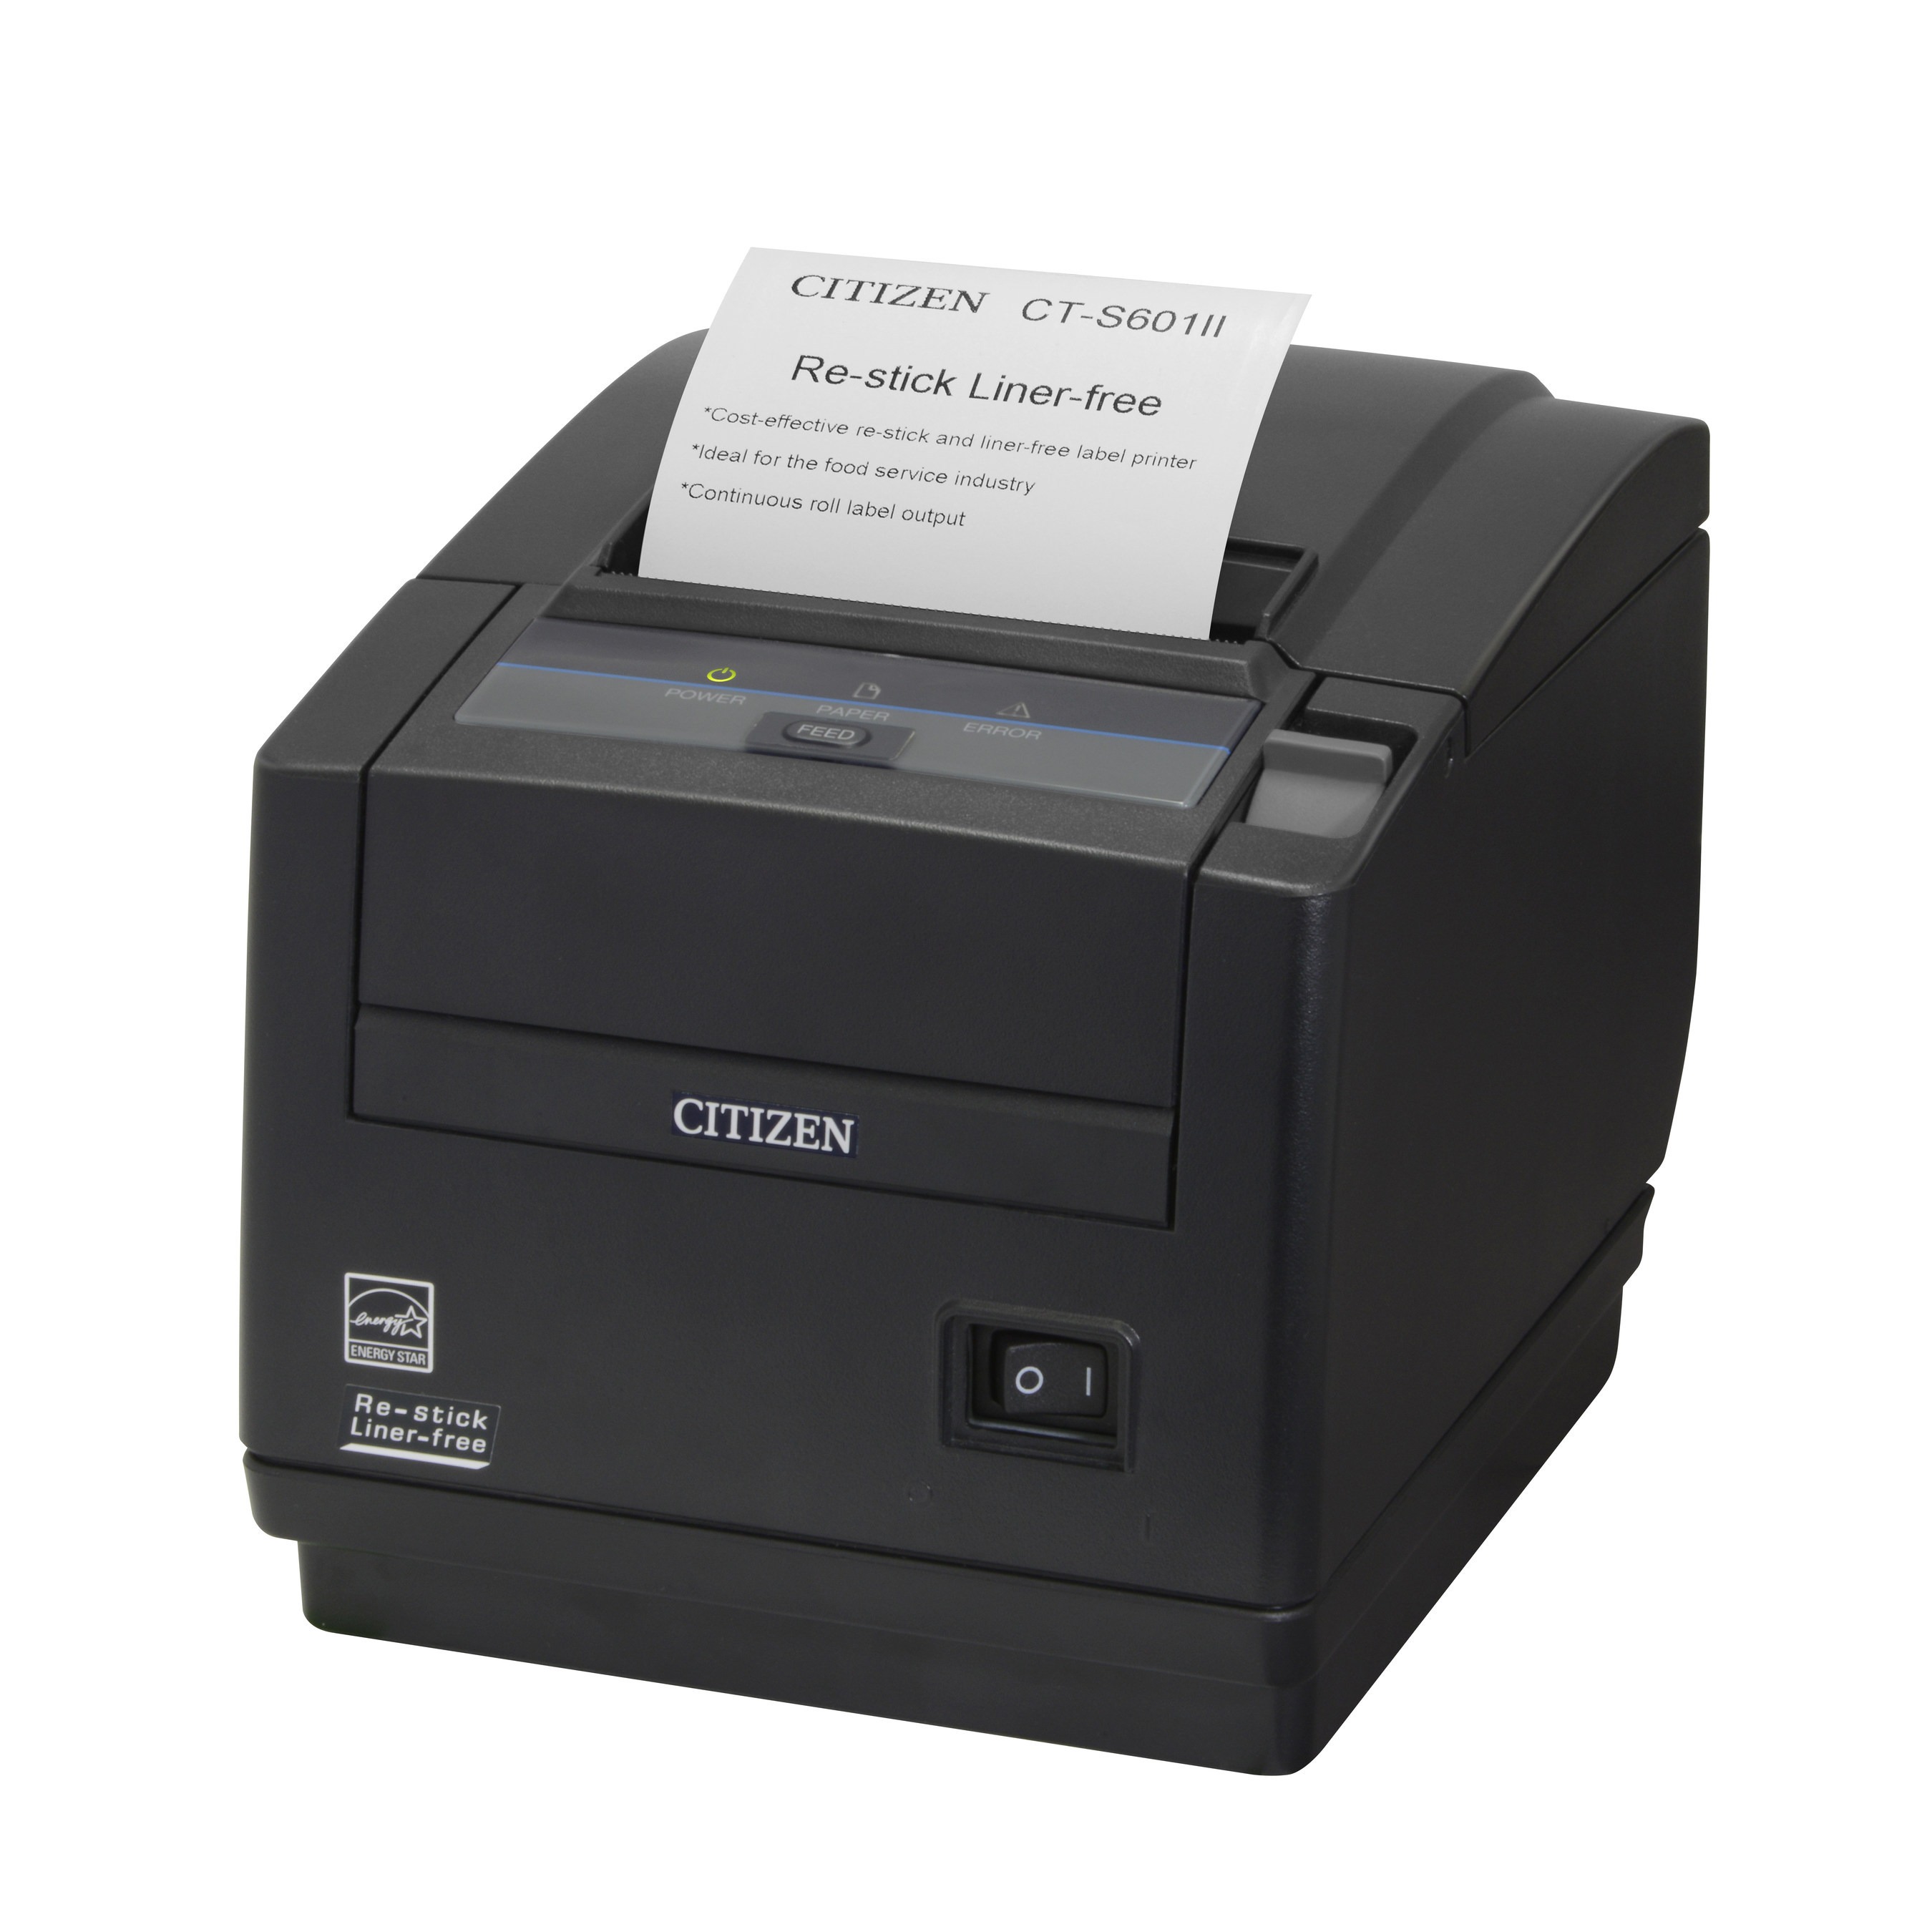 Citizen announces CT-S601IIR re-stick, liner-free printing solution